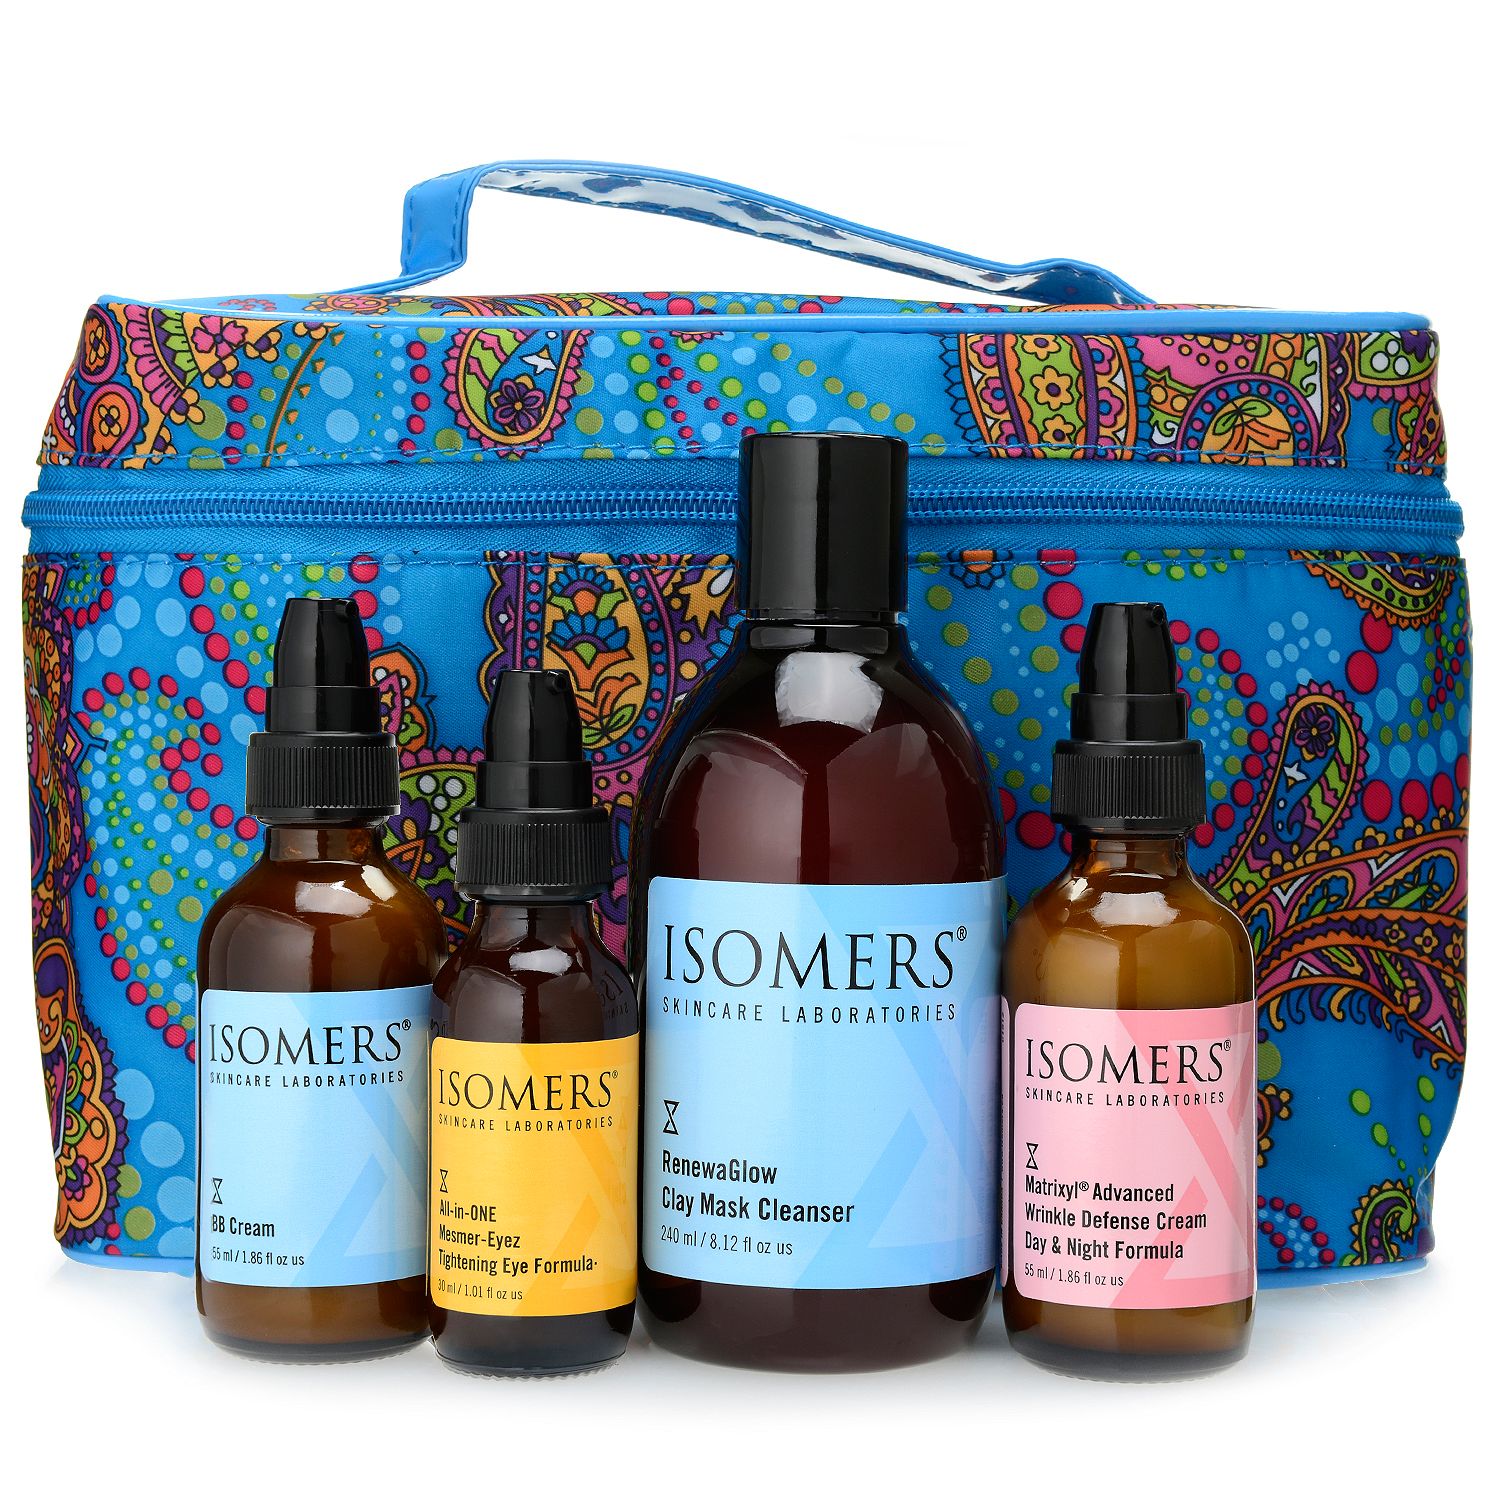 312-575- ISOMERS Skincare Four-Piece Complete Skincare Routine Set for Face w/ Cosmetic Bag